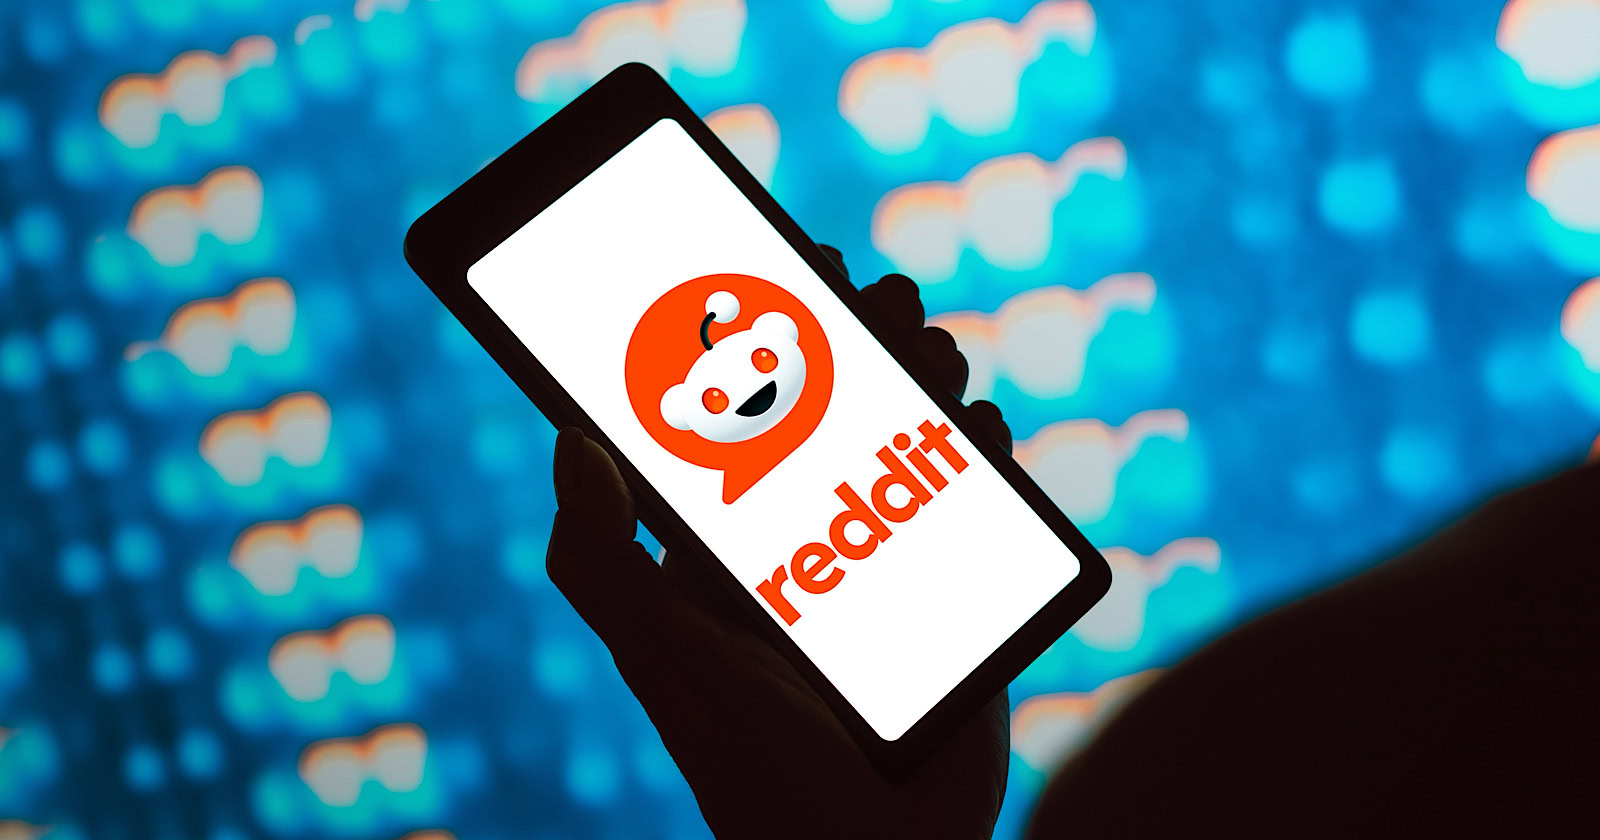 In this photo illustration, the Reddit logo is displayed on a smartphone screen.